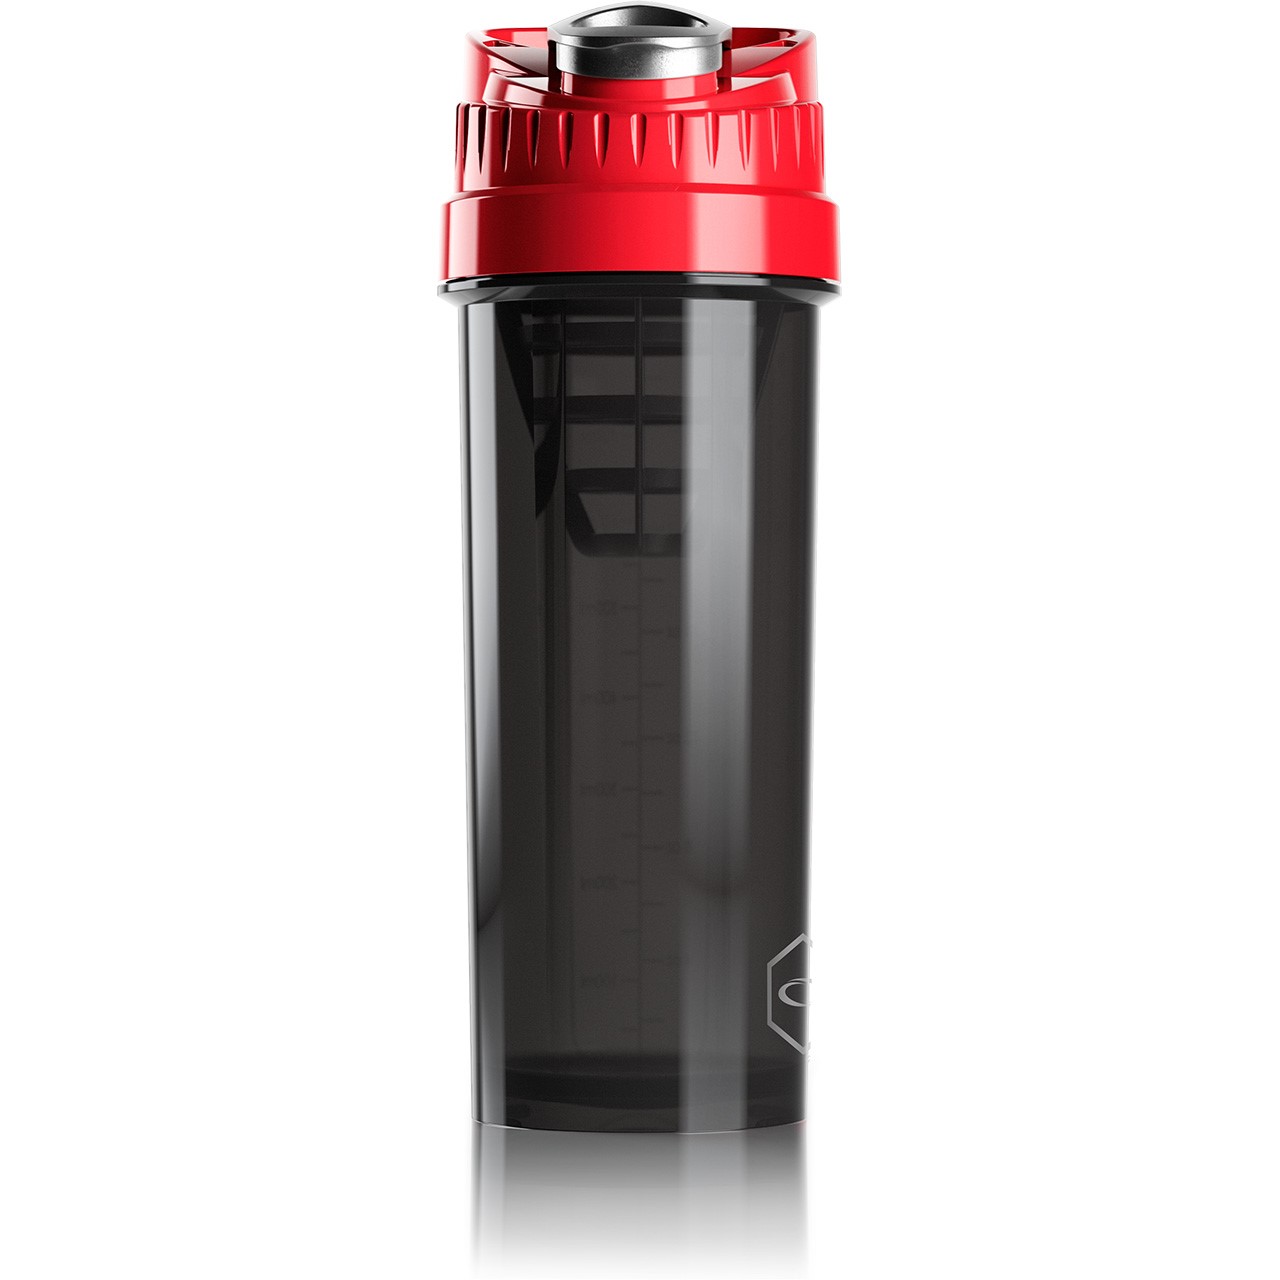 New Protein Shaker Cyclone Cup Rot 950 ml